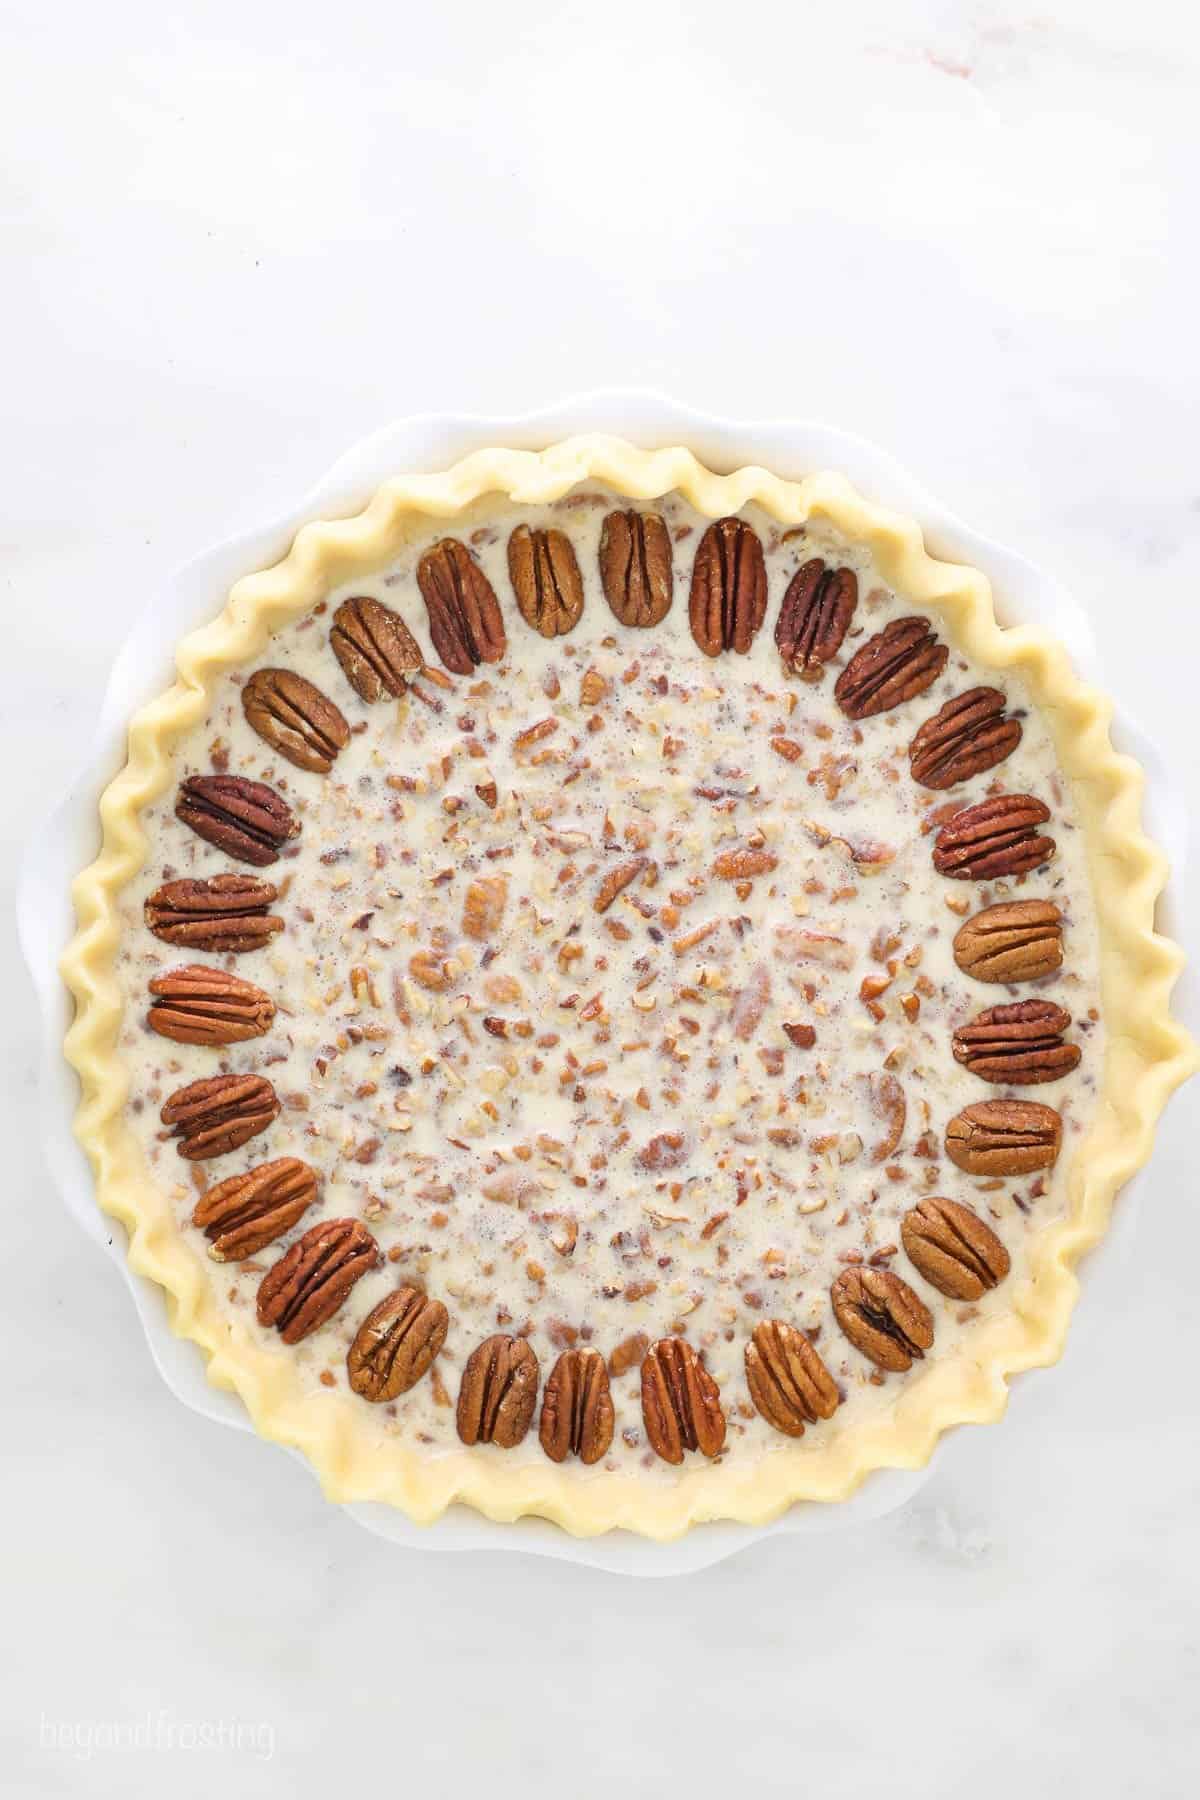 A homemade pie crust with the unbaked Kahlua pecan filling inside and a ring of halved pecans around the top edge